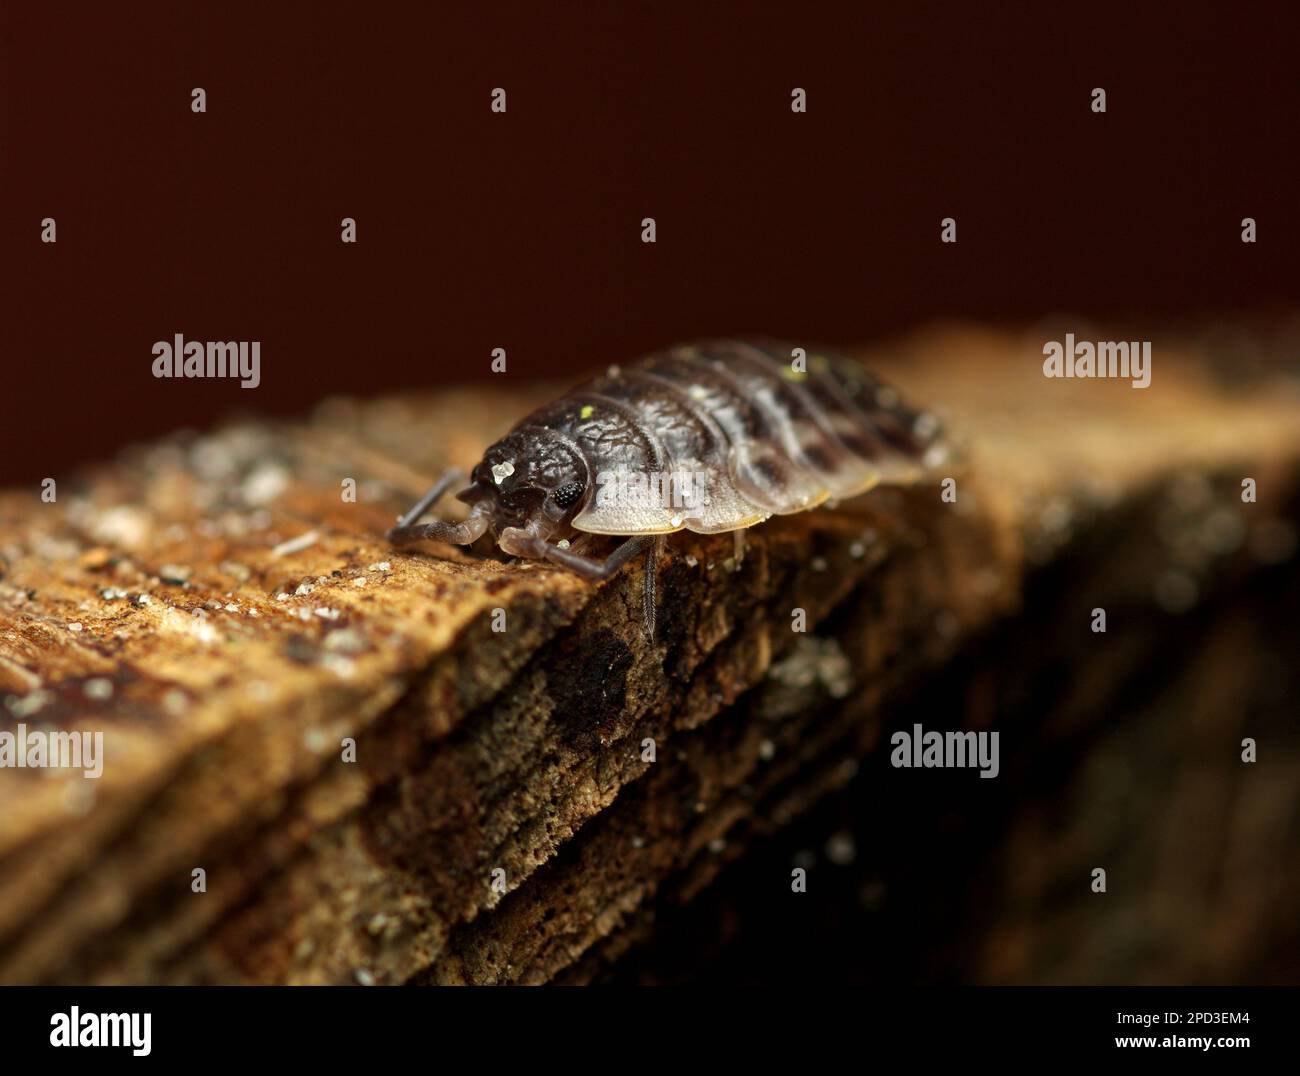 Common Woodlouse (Oniscus asellus) on a piece of wood, Macrophotography Arthropods, Isopods,  Mauerassel, Assel Stock Photo